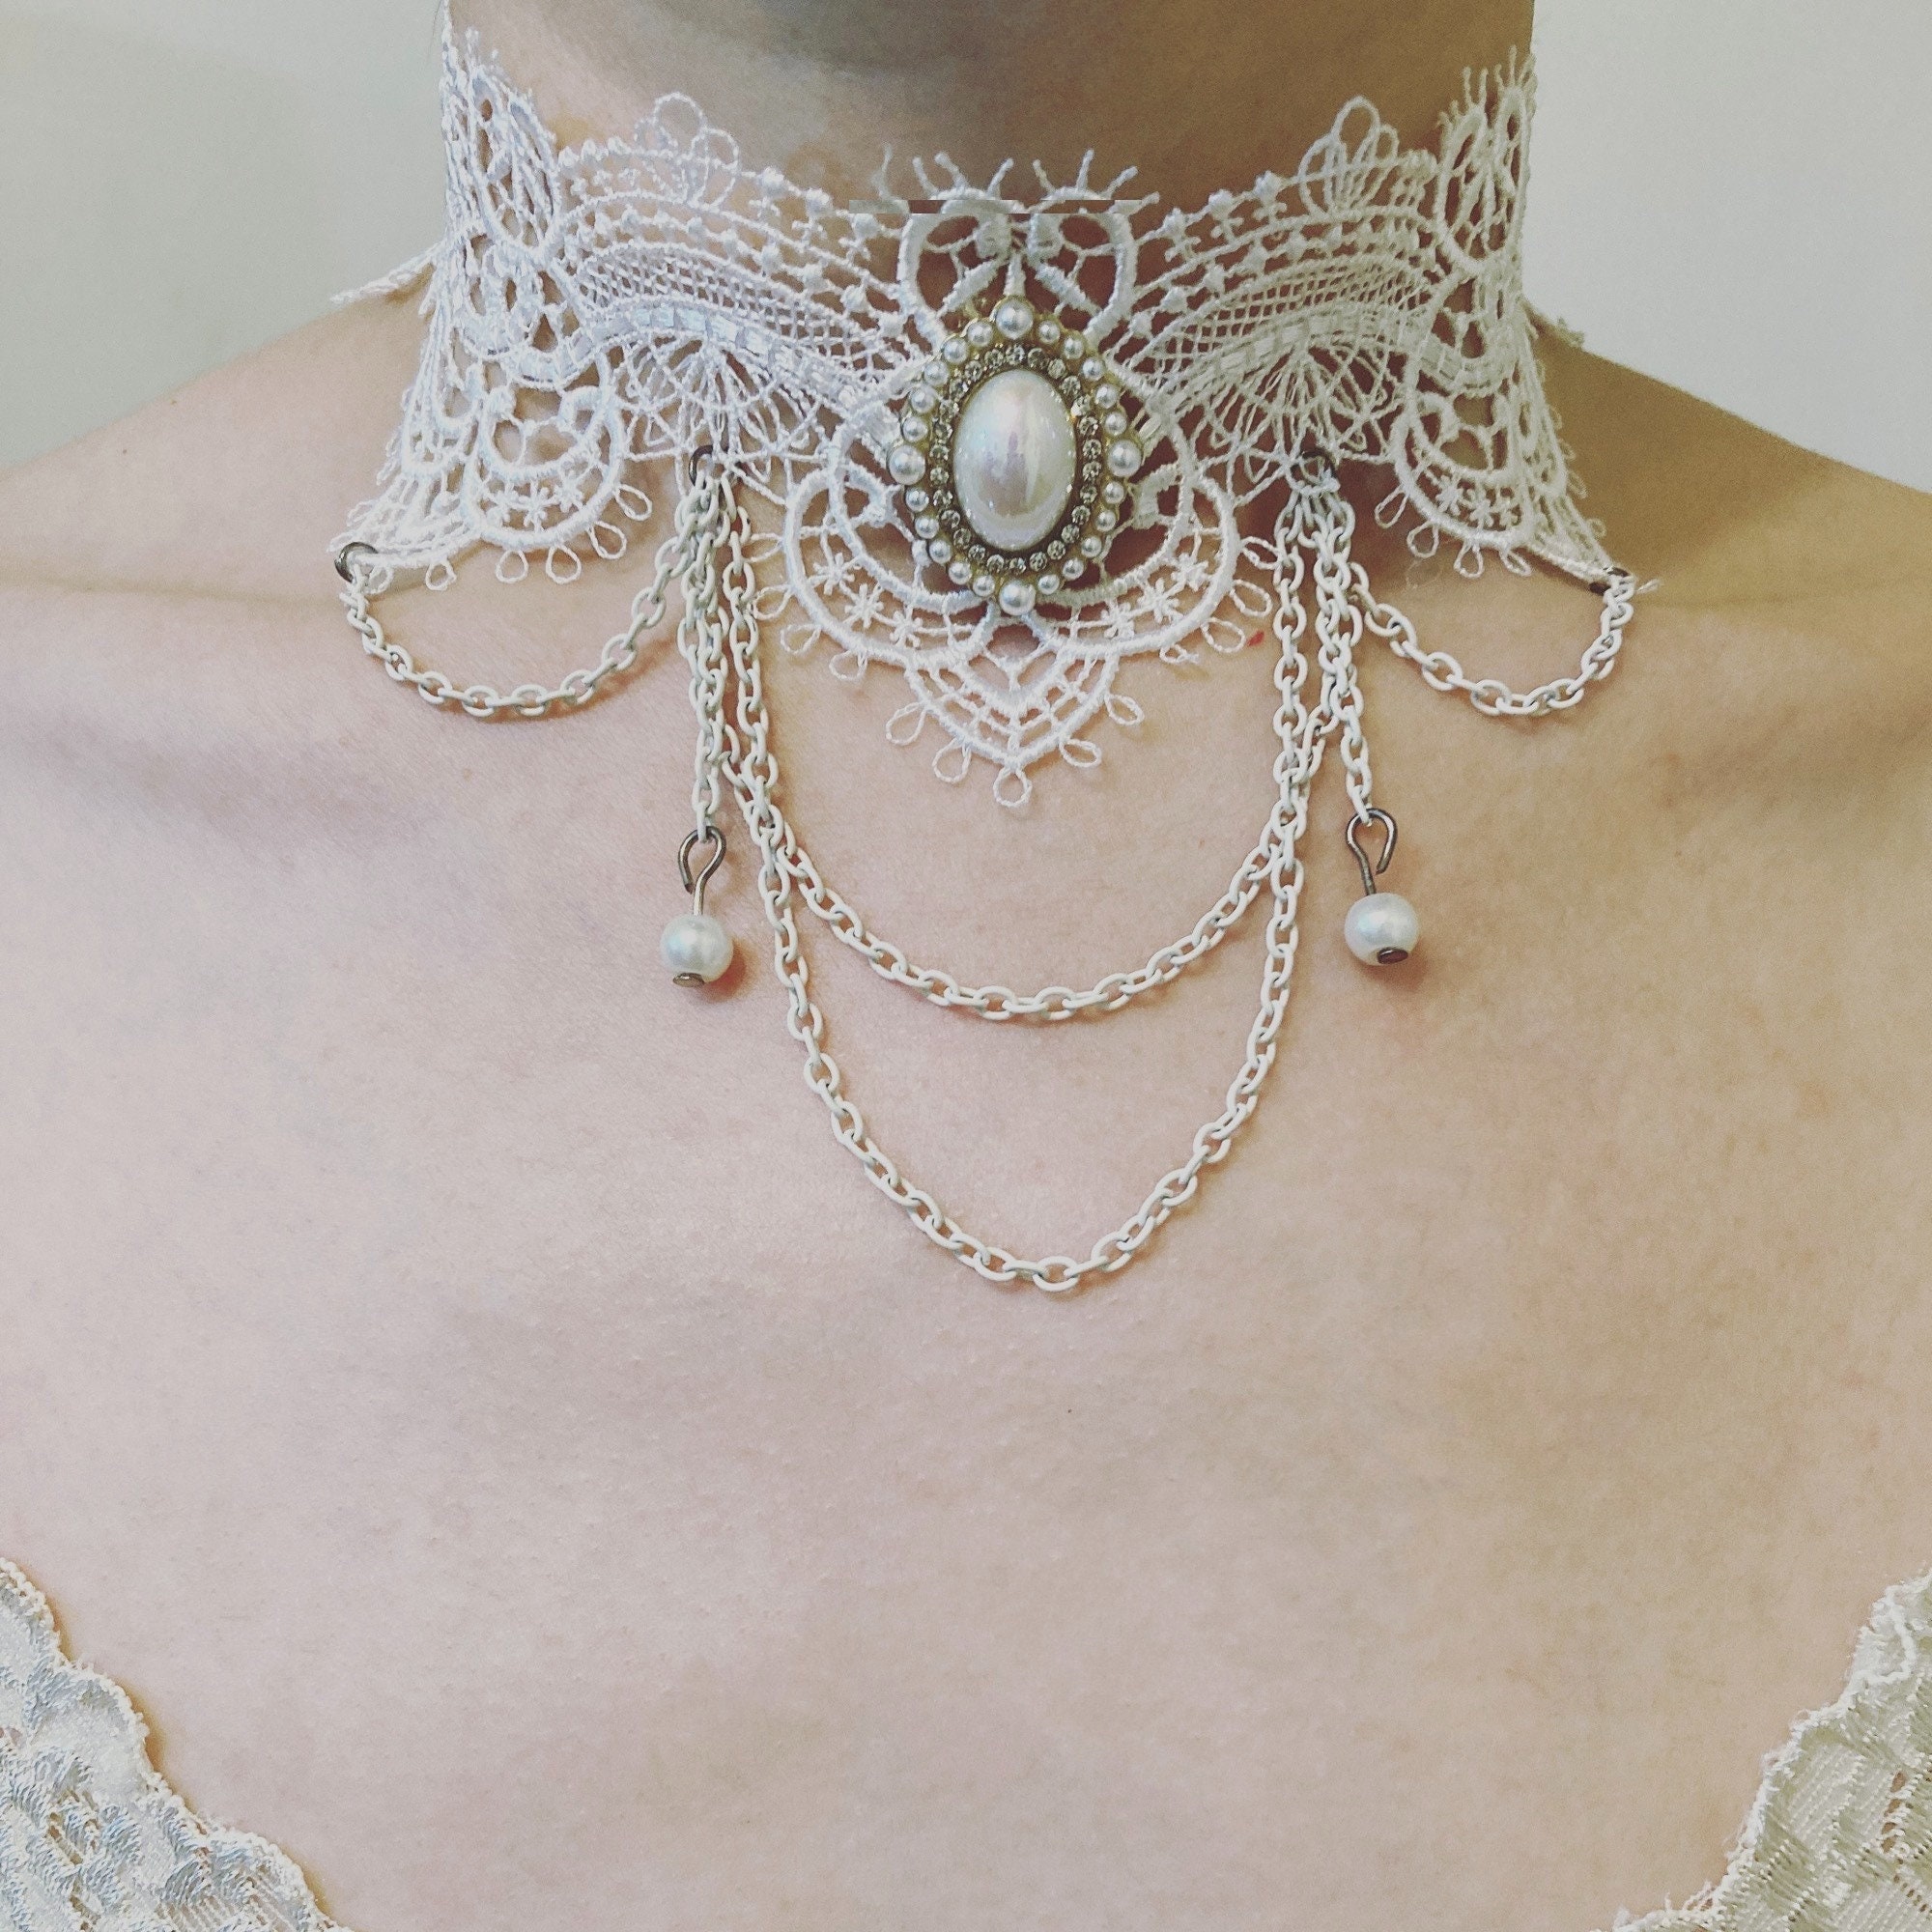 krans fatning Lil Victorian Inspired White Lace Choker Necklace - Etsy